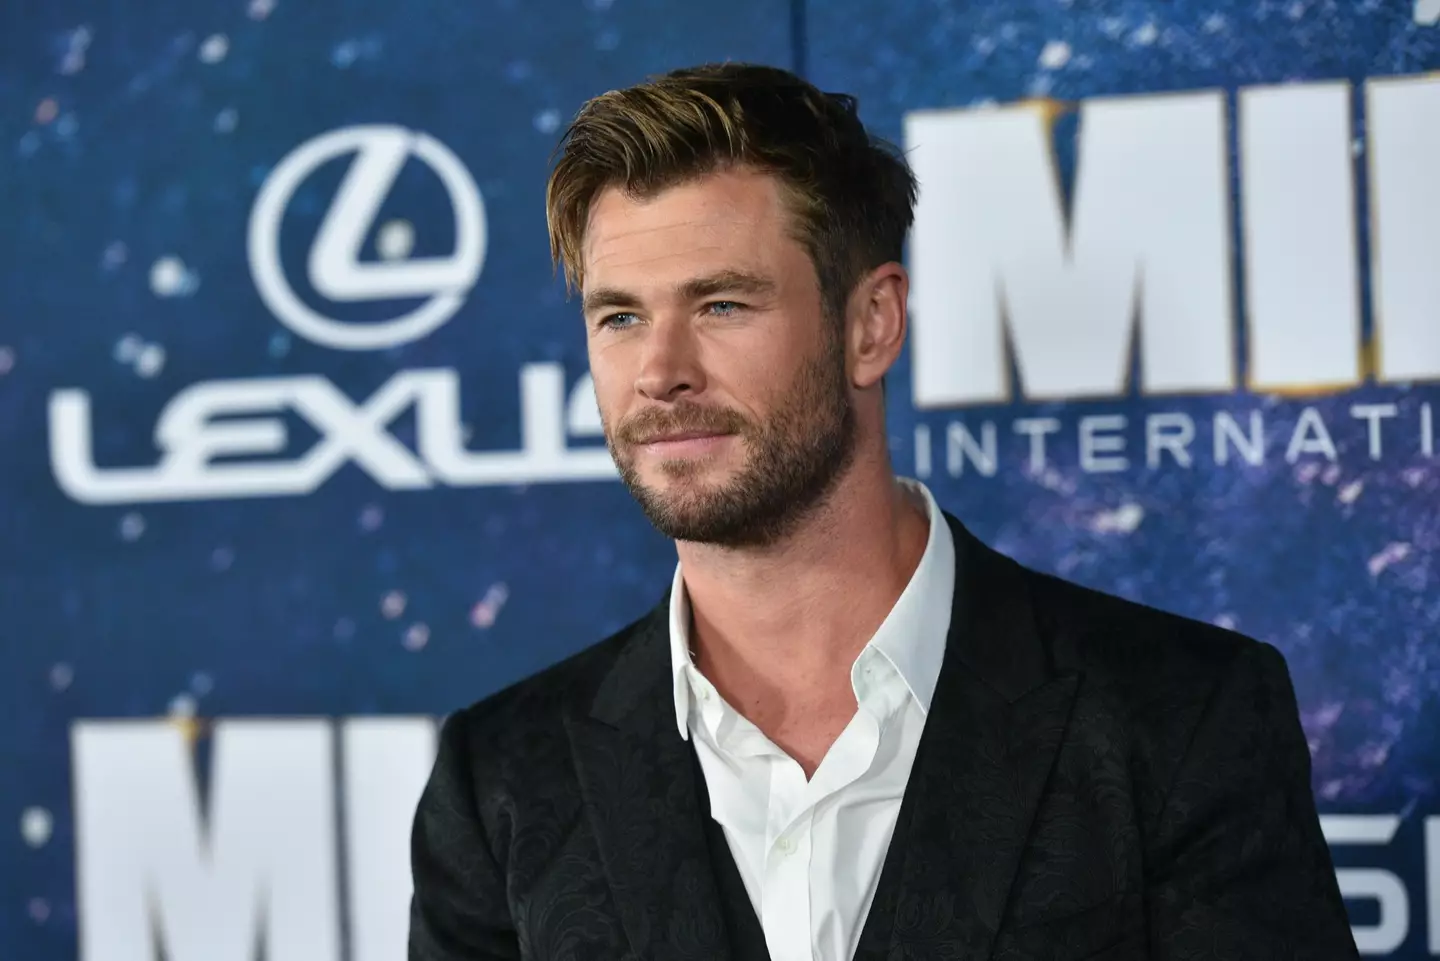 Fans are keen to see Chris Hemsworth step into the shoes of Hulk Hogan.